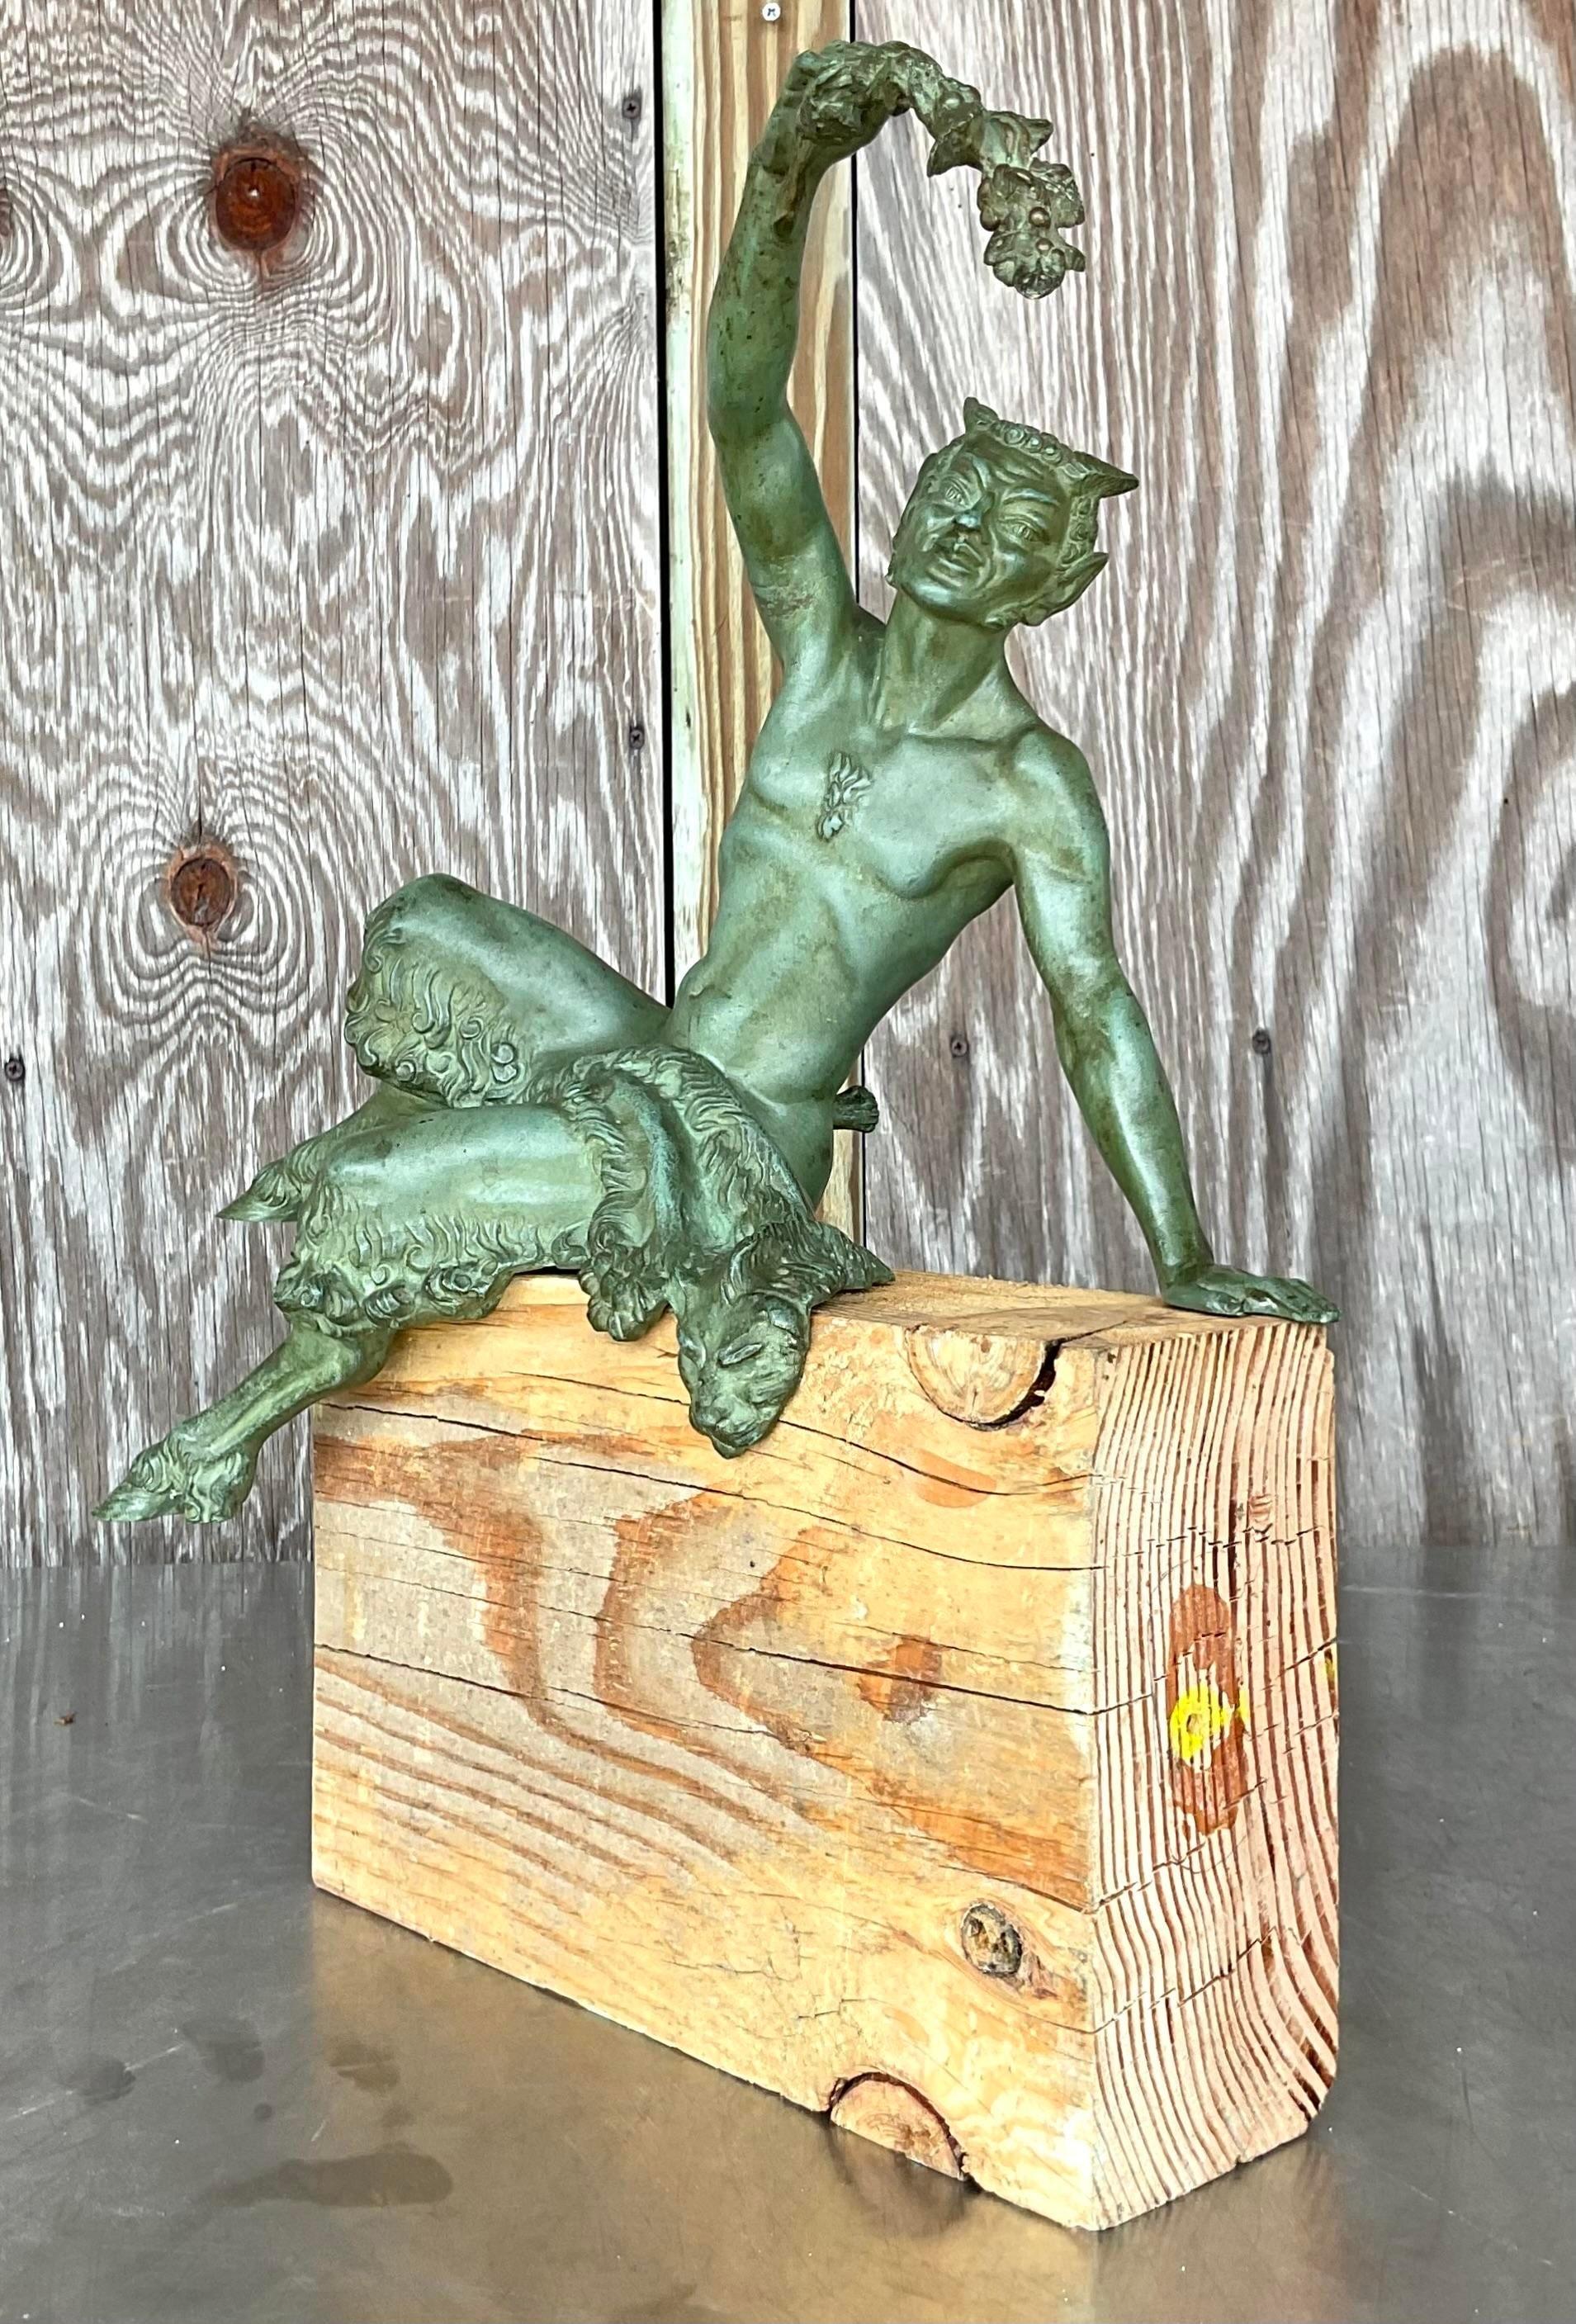 Enhance your space with the enchanting allure of this Vintage Boho Bronze Satyr Statue on Wood Plinth. Expertly crafted, the detailed bronze satyr exudes bohemian mystique, while the solid wood plinth adds a touch of classic American craftsmanship.